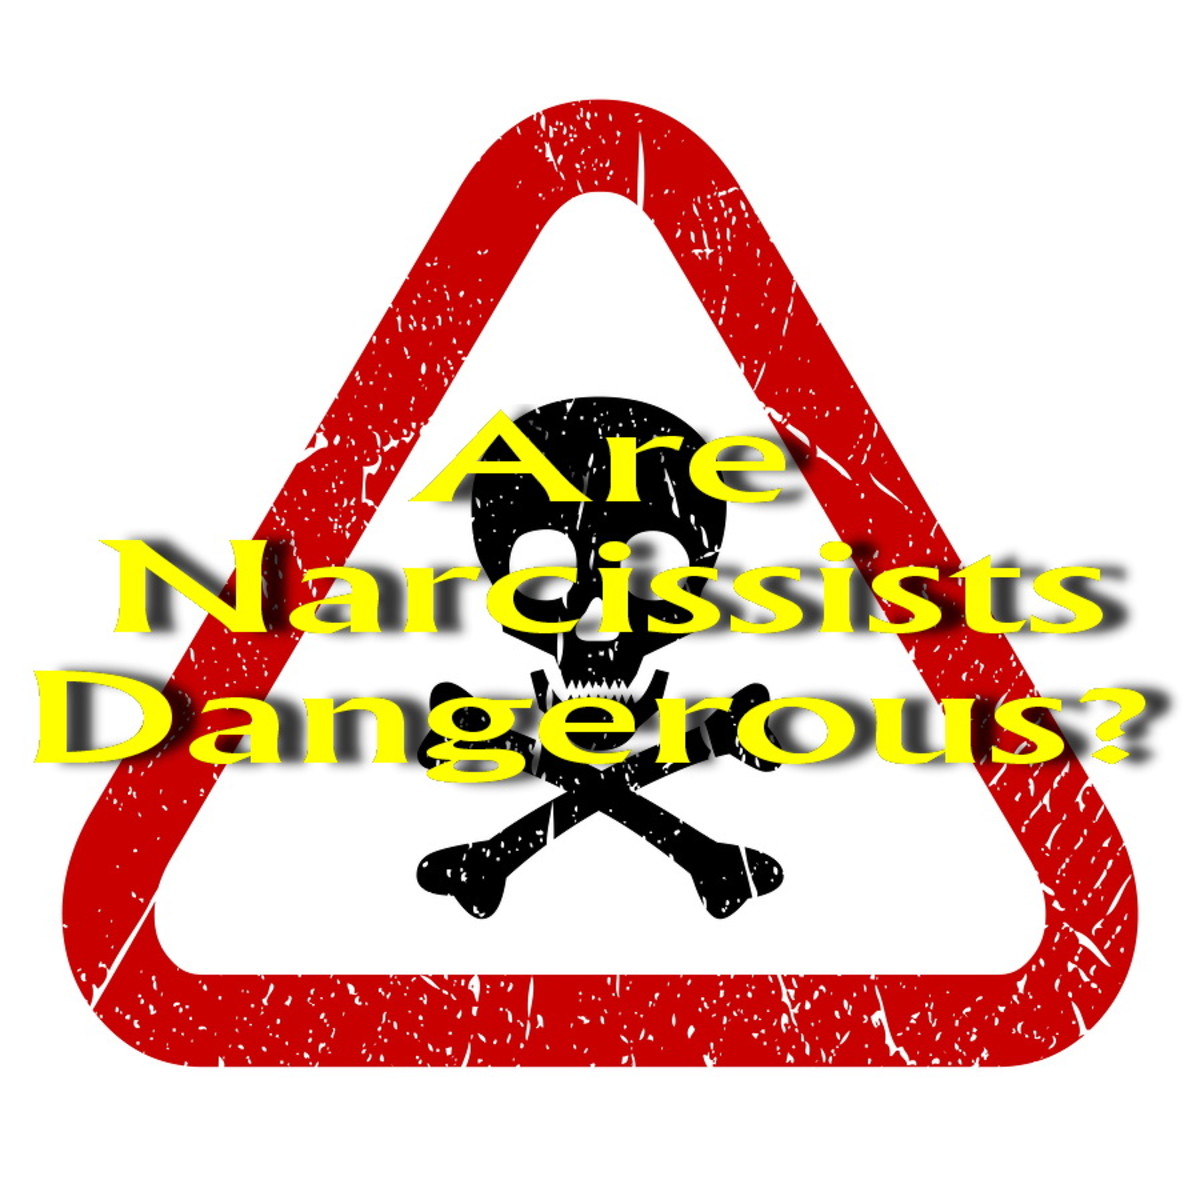 Why Narcissists Are Dangerous